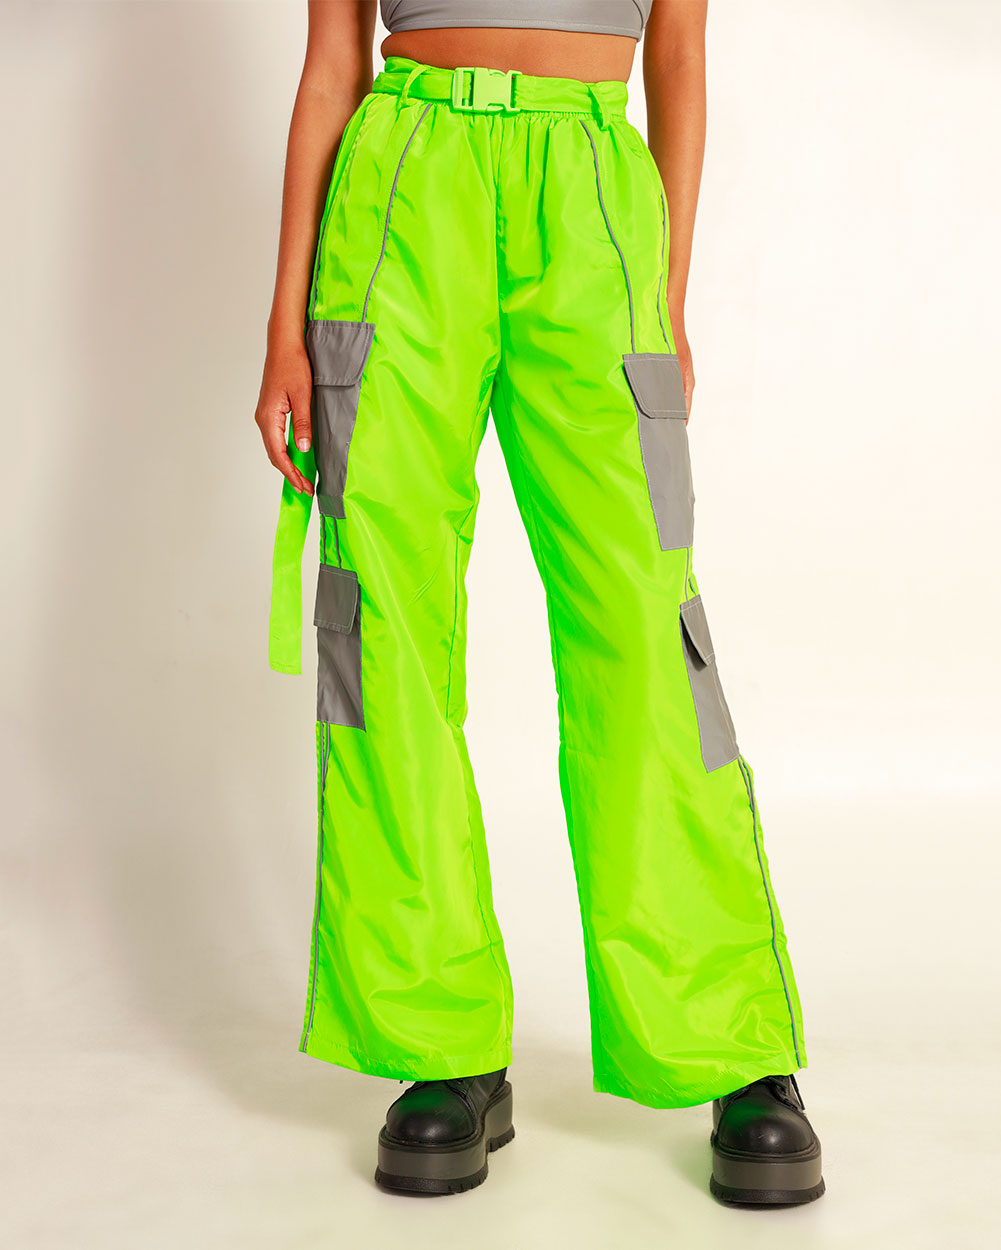 90s Lime Green Pants - Etsy